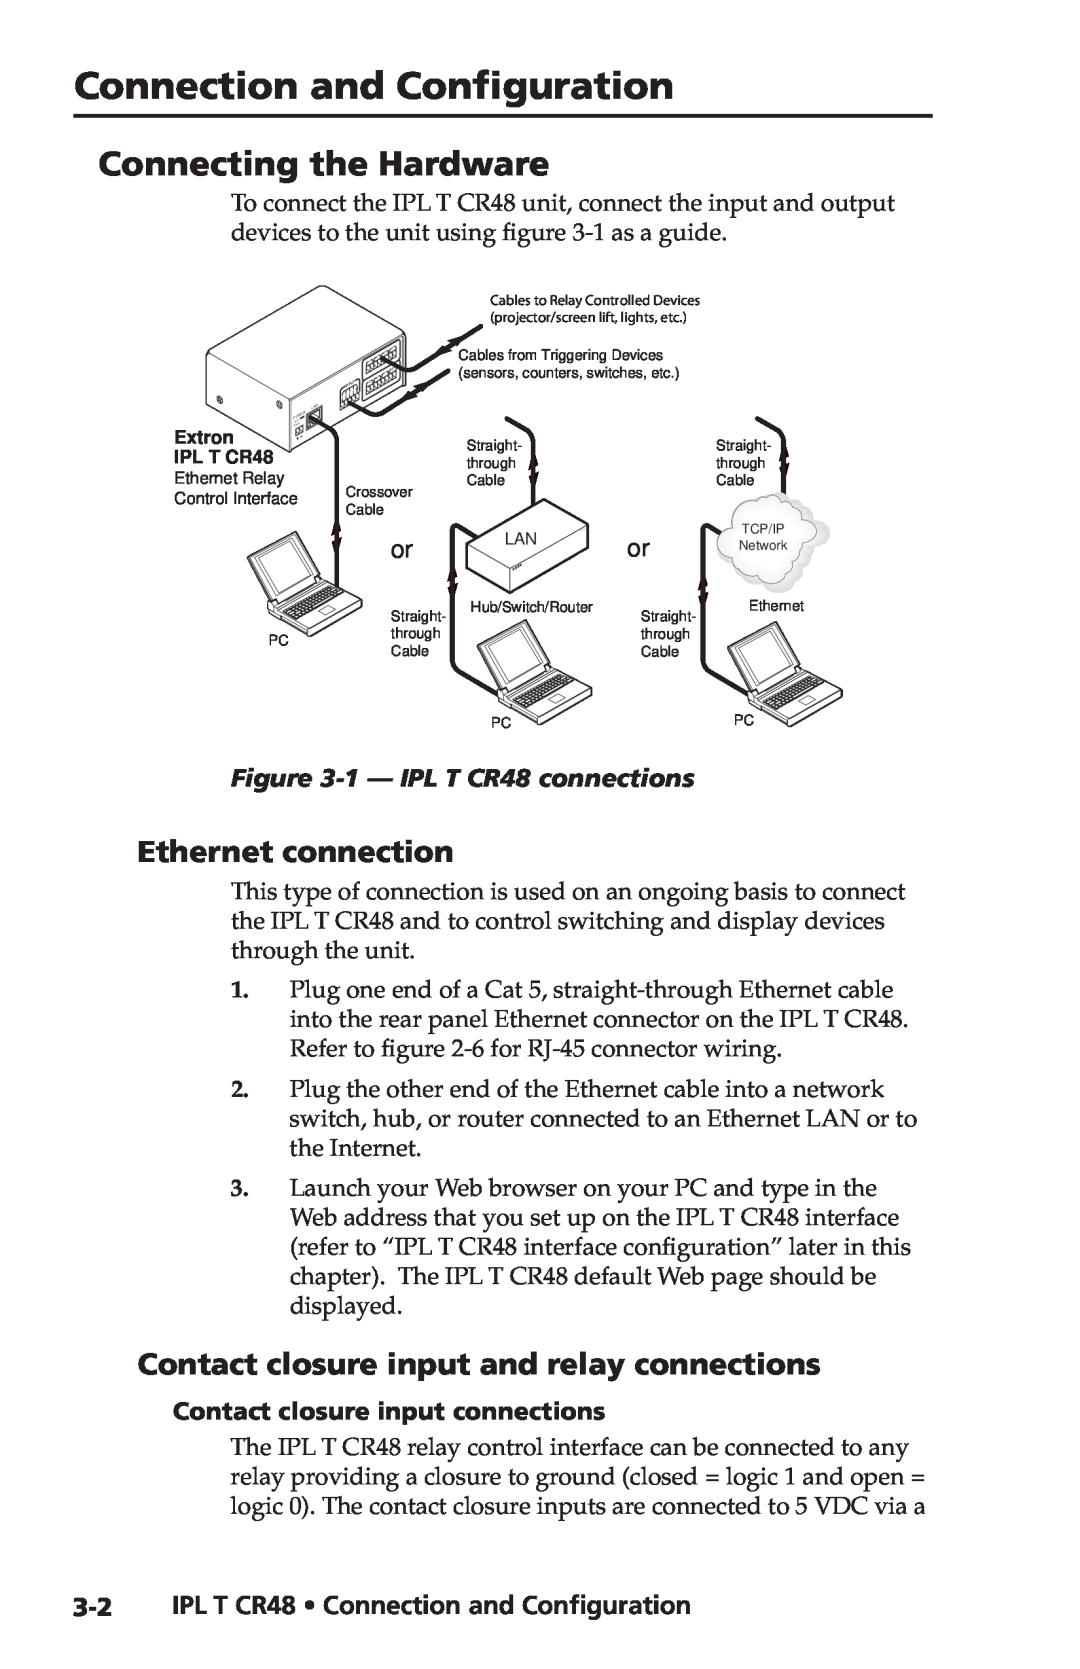 Extron electronic IPL T CR48 manual Connection and Configuration, Connecting the Hardware, Ethernet connection, Extron 